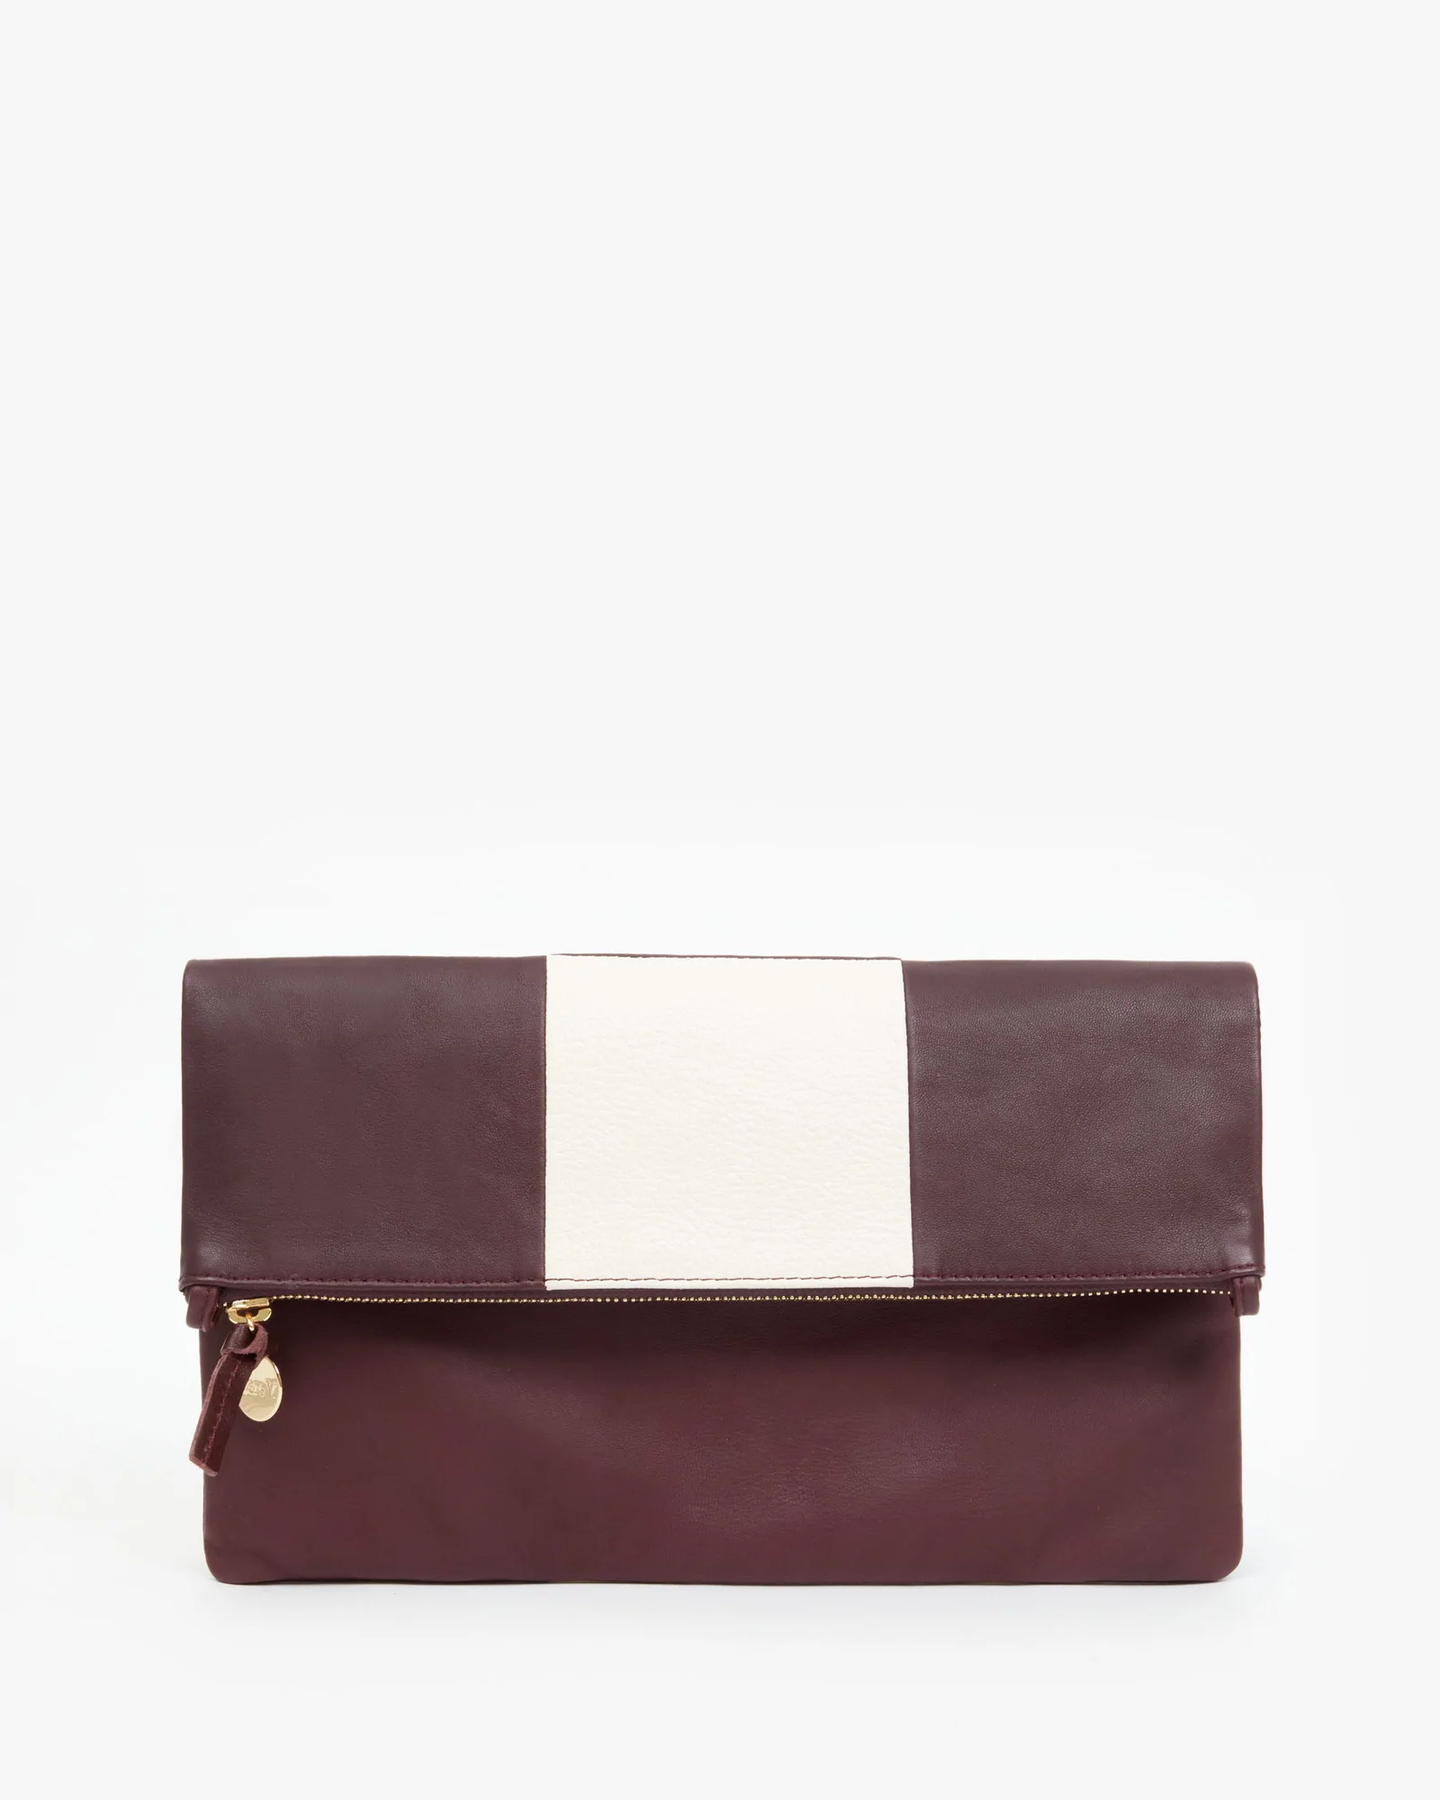 clare v coin clutch